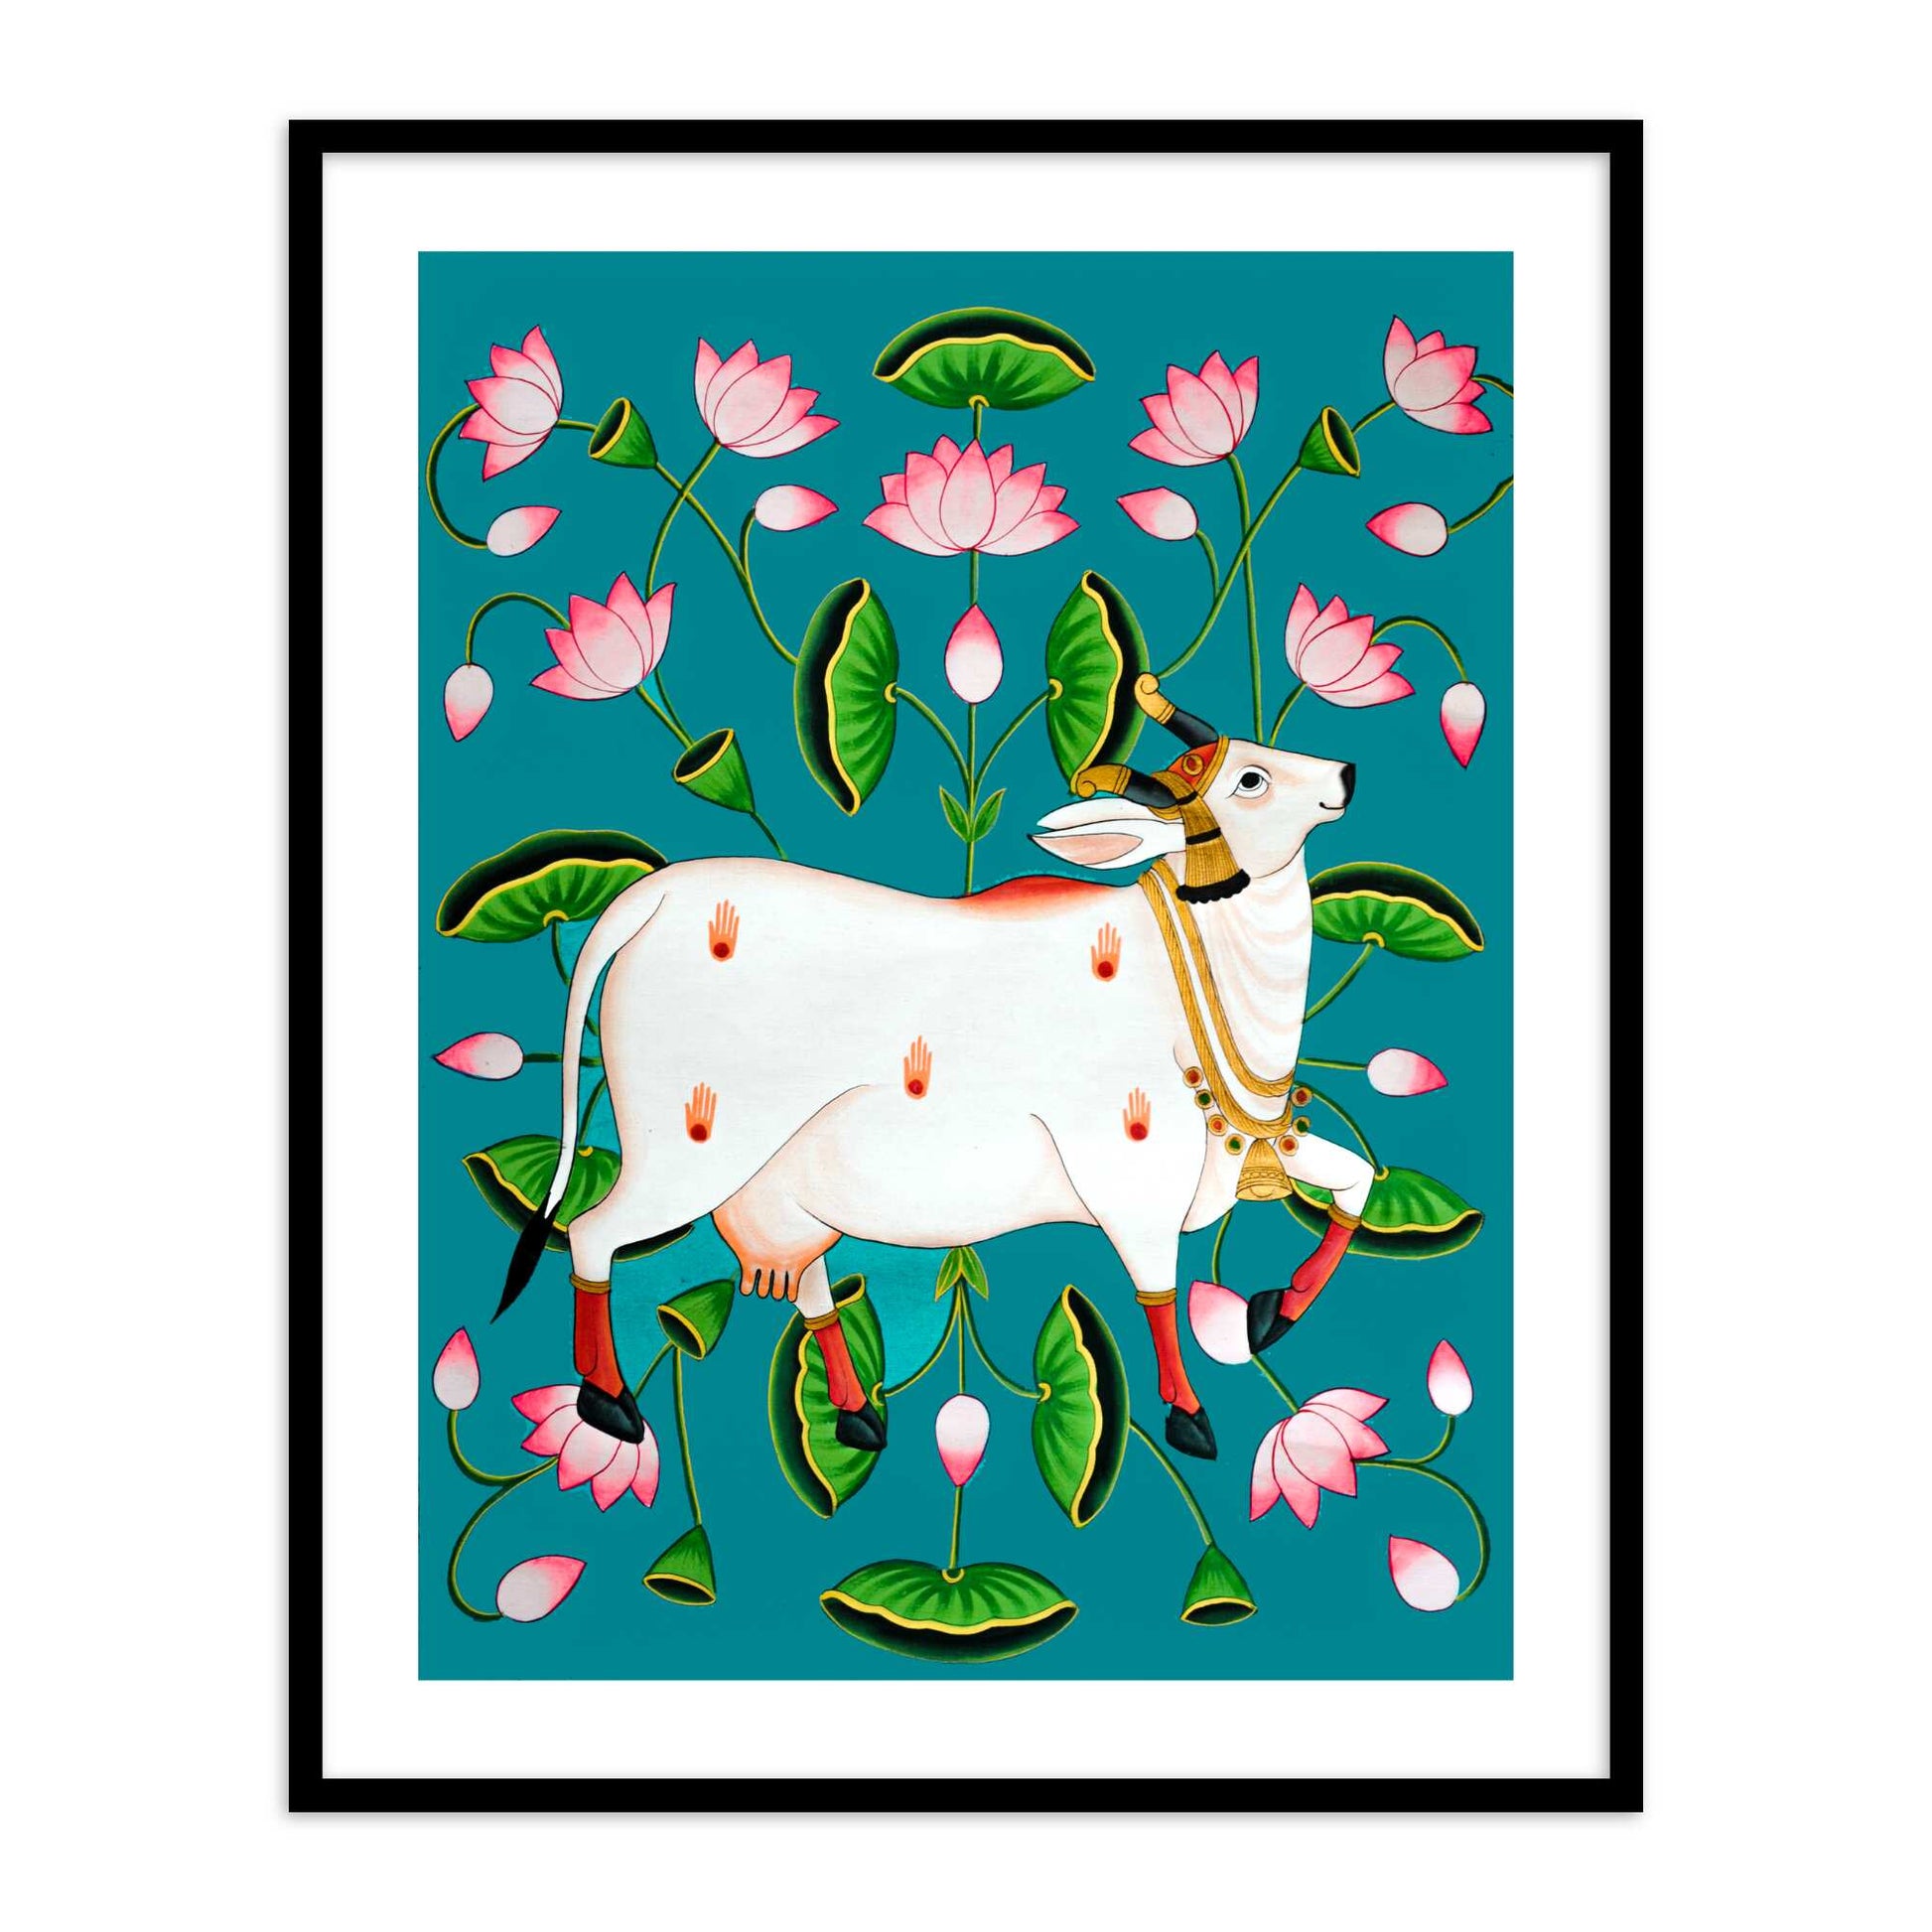 Buy Online Pichwai Cow Painting | ContemporaryPichwai Painting | Wall Art for Home decor